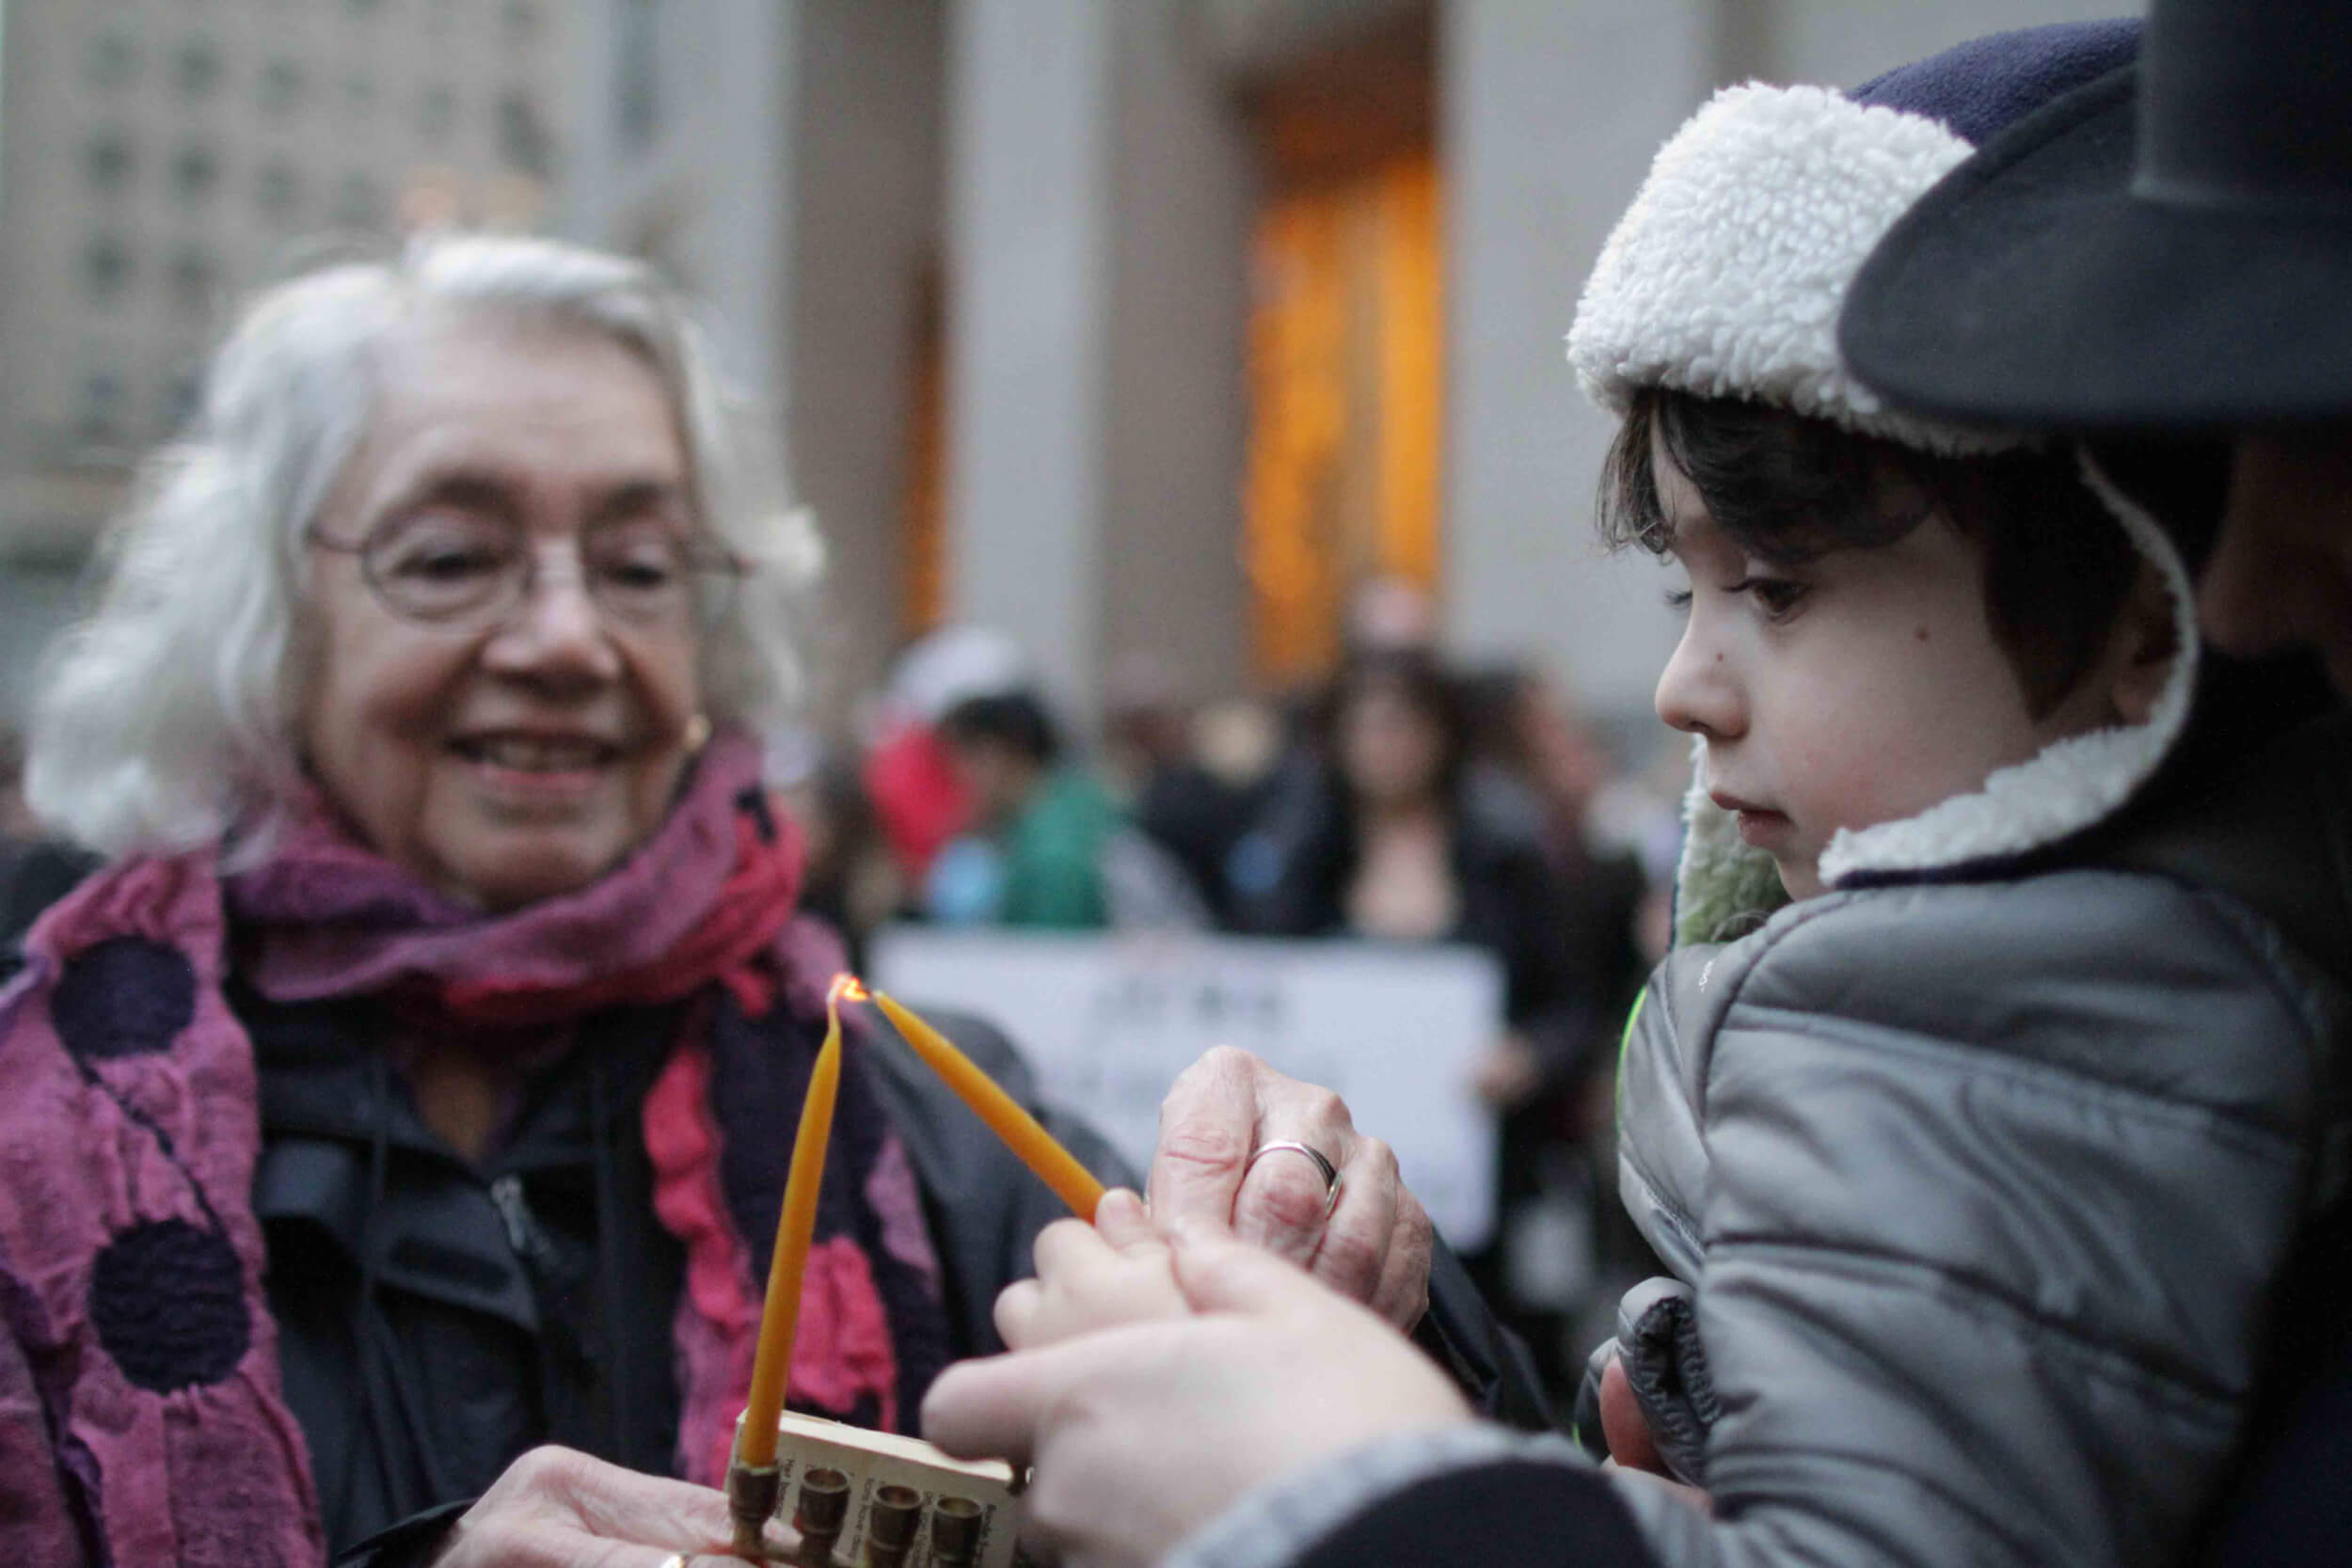 Dorothy Zellner and a young volunteer help light a menorah. (Photo: Jewish Voice for Peace)